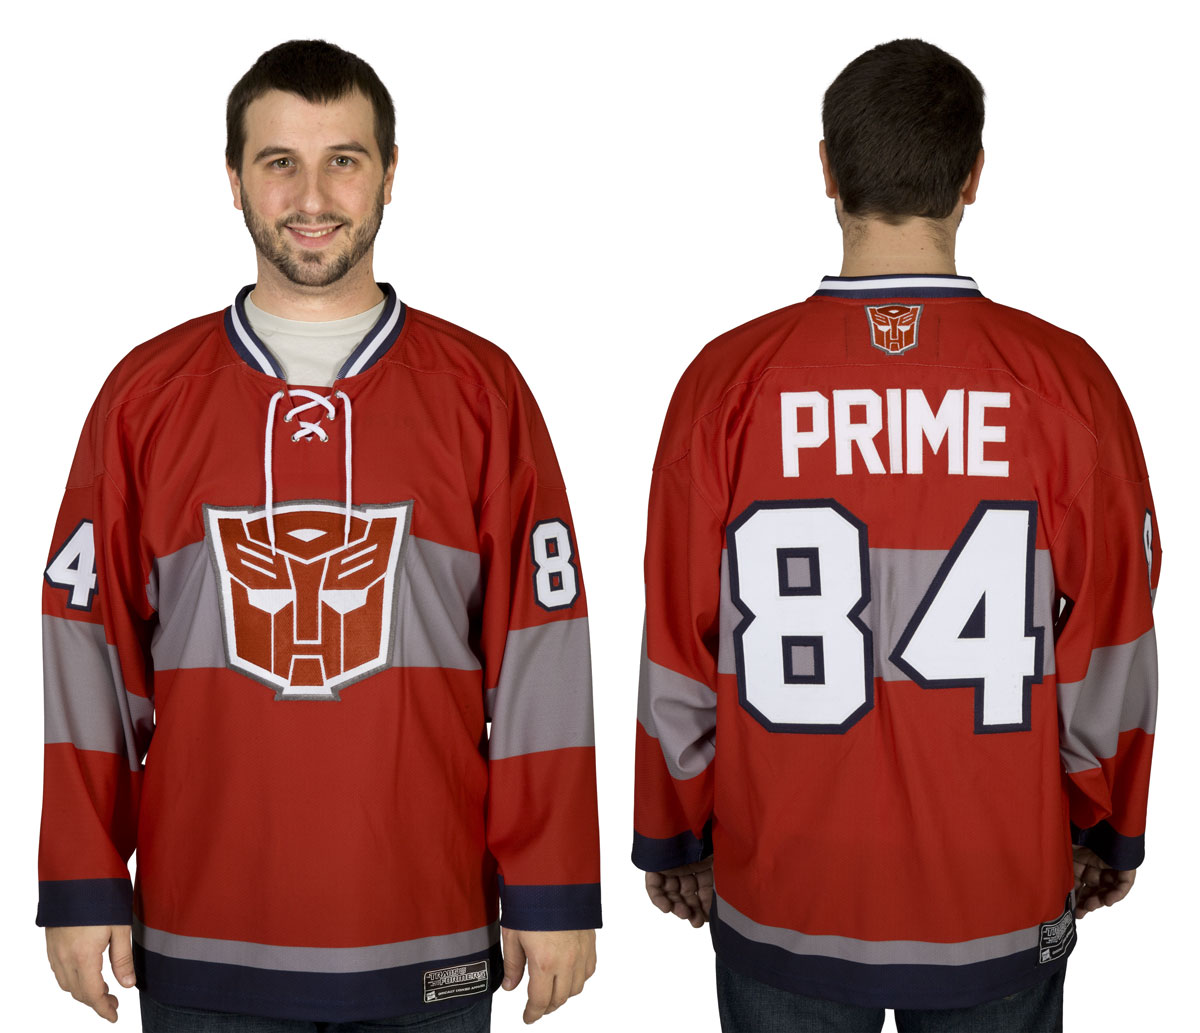 When new jerseys have been purchased, other jerseys must become available.  Check captions and comments for prices! : r/hockeyjerseys